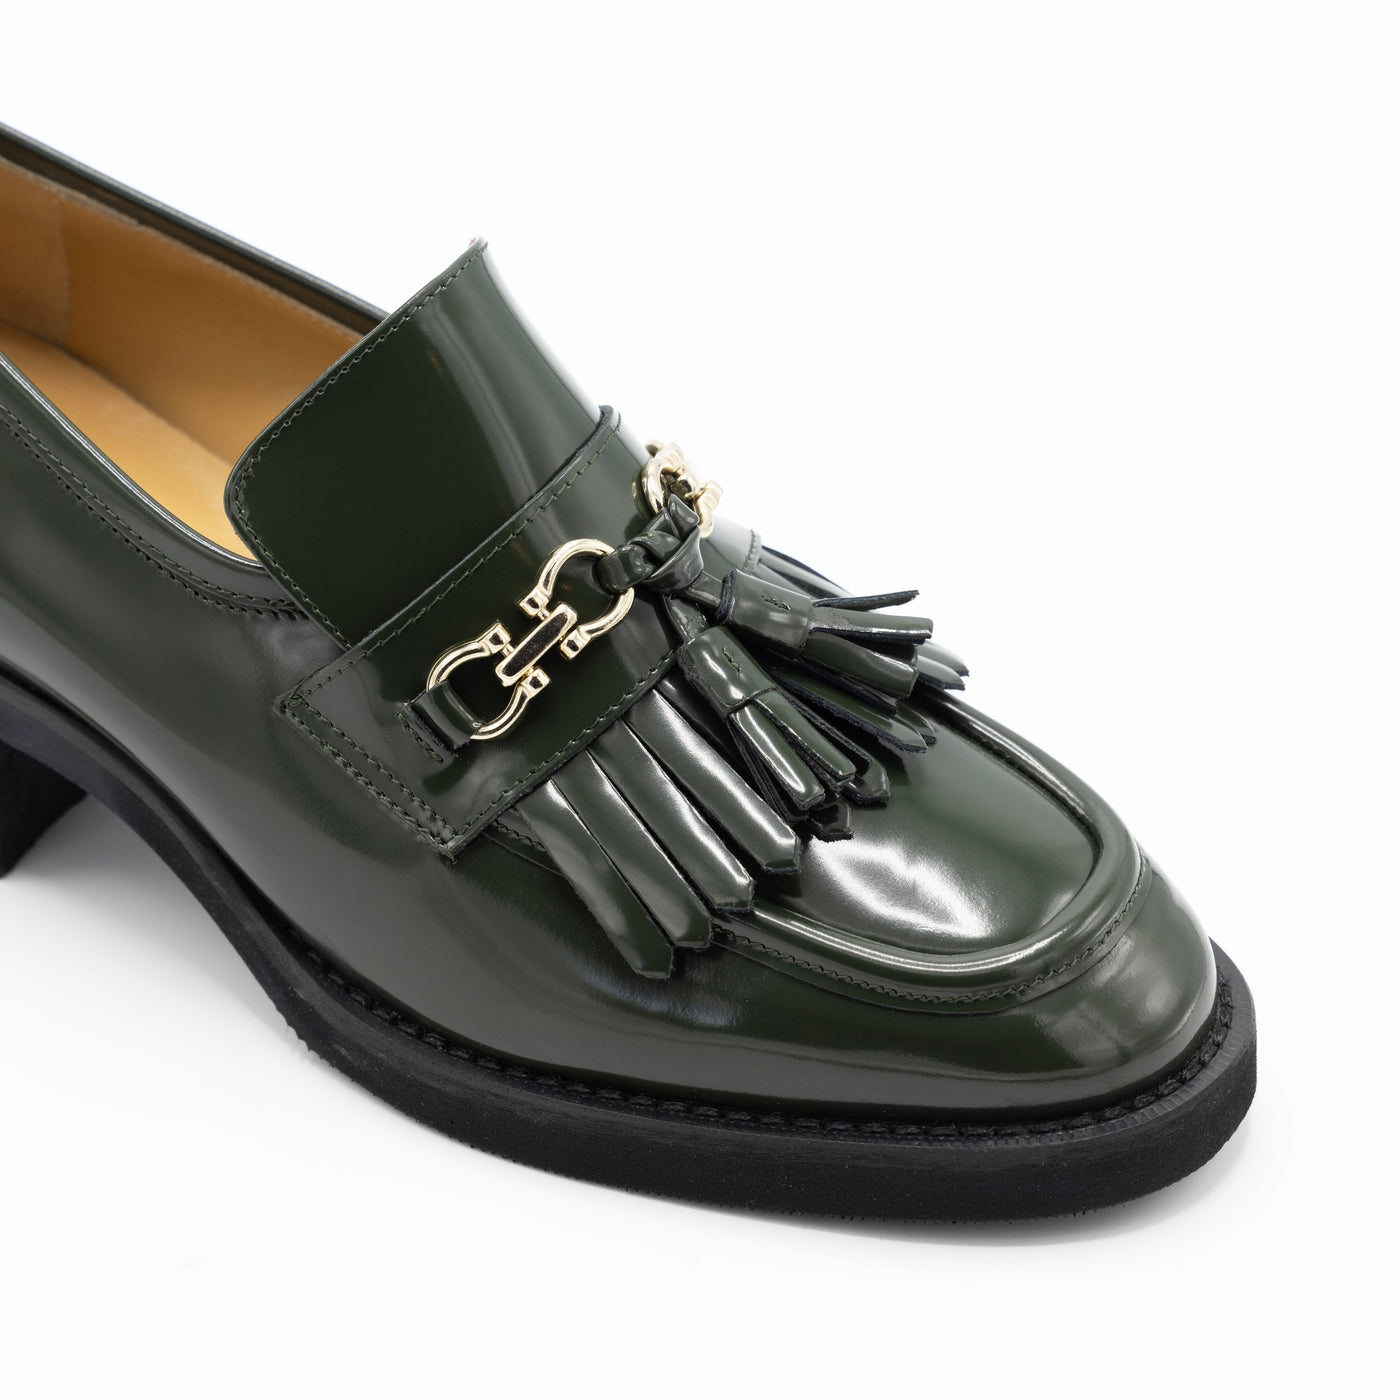 Green loafer pumps with gold tone embellishment